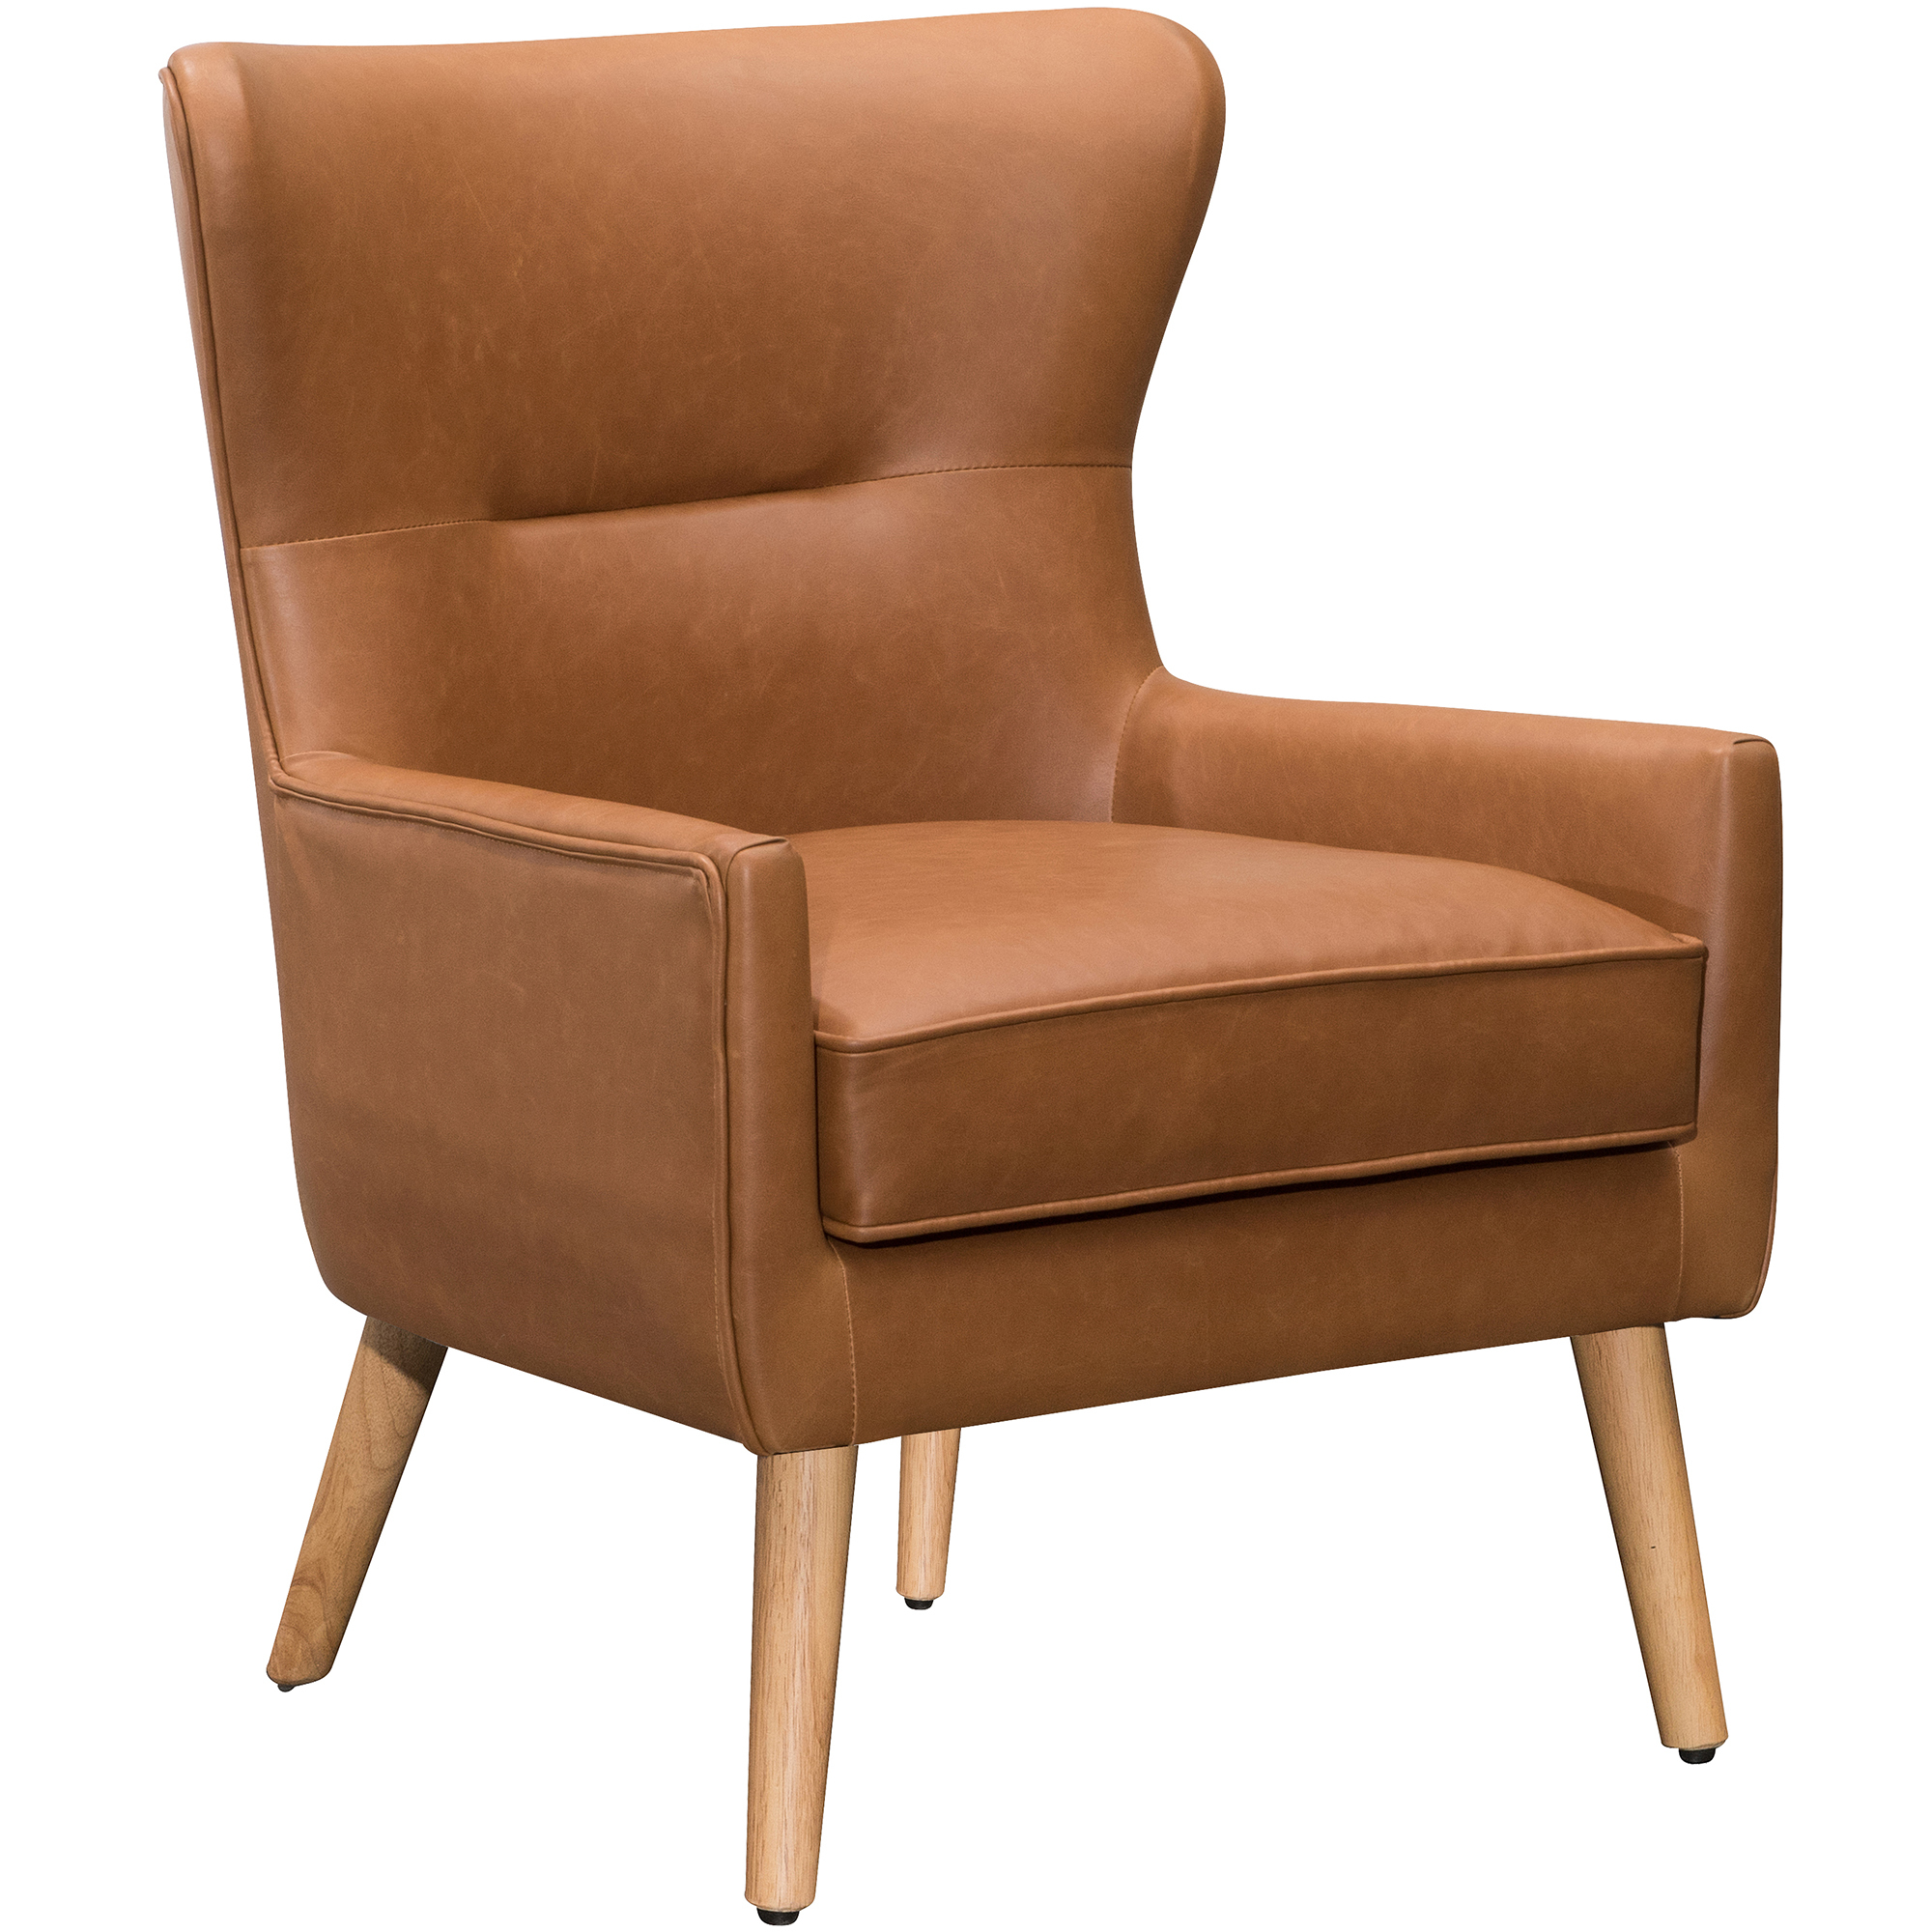 Faux Leather Wingback Armchair, Brown Leather Wing Chair